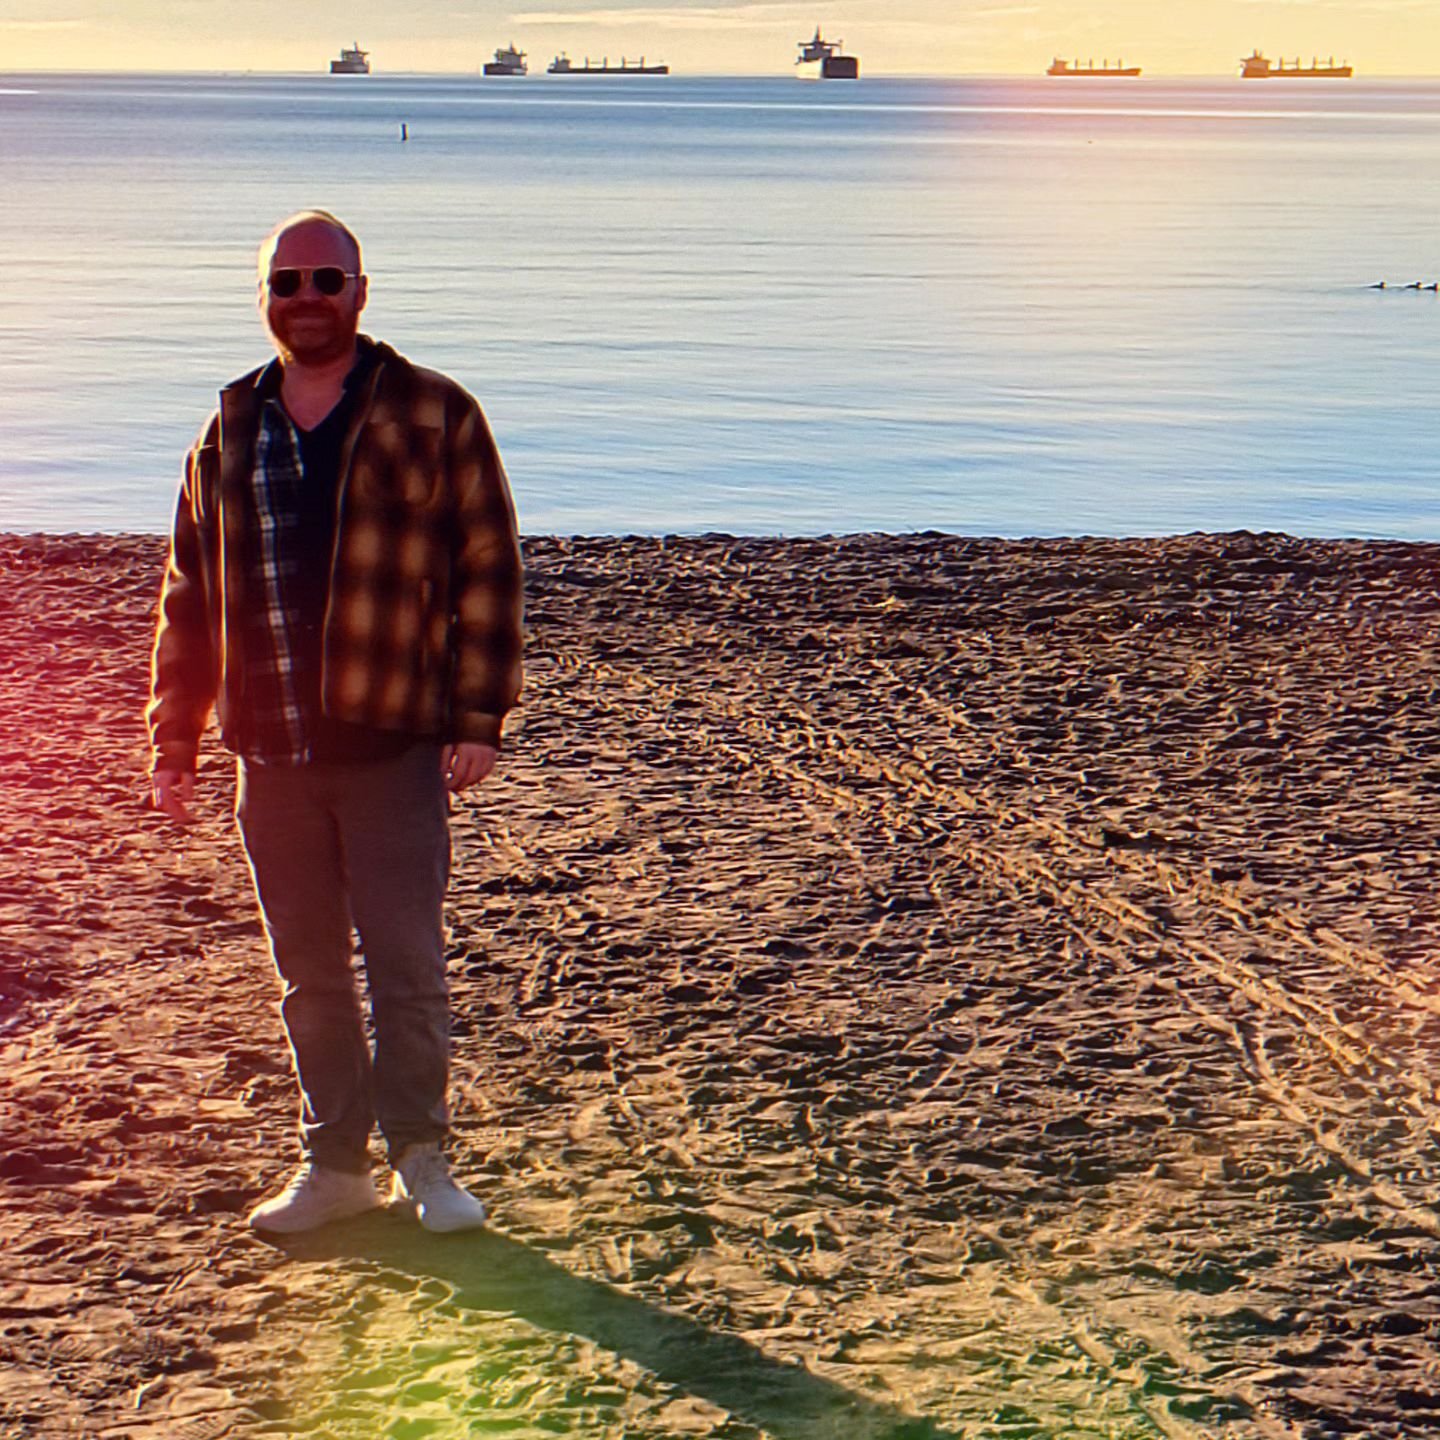 New bed. New jacket. New man. It has been a big week. #ruggedfox #jacket #dating #redhead #beach #gay #vancouver #style #february